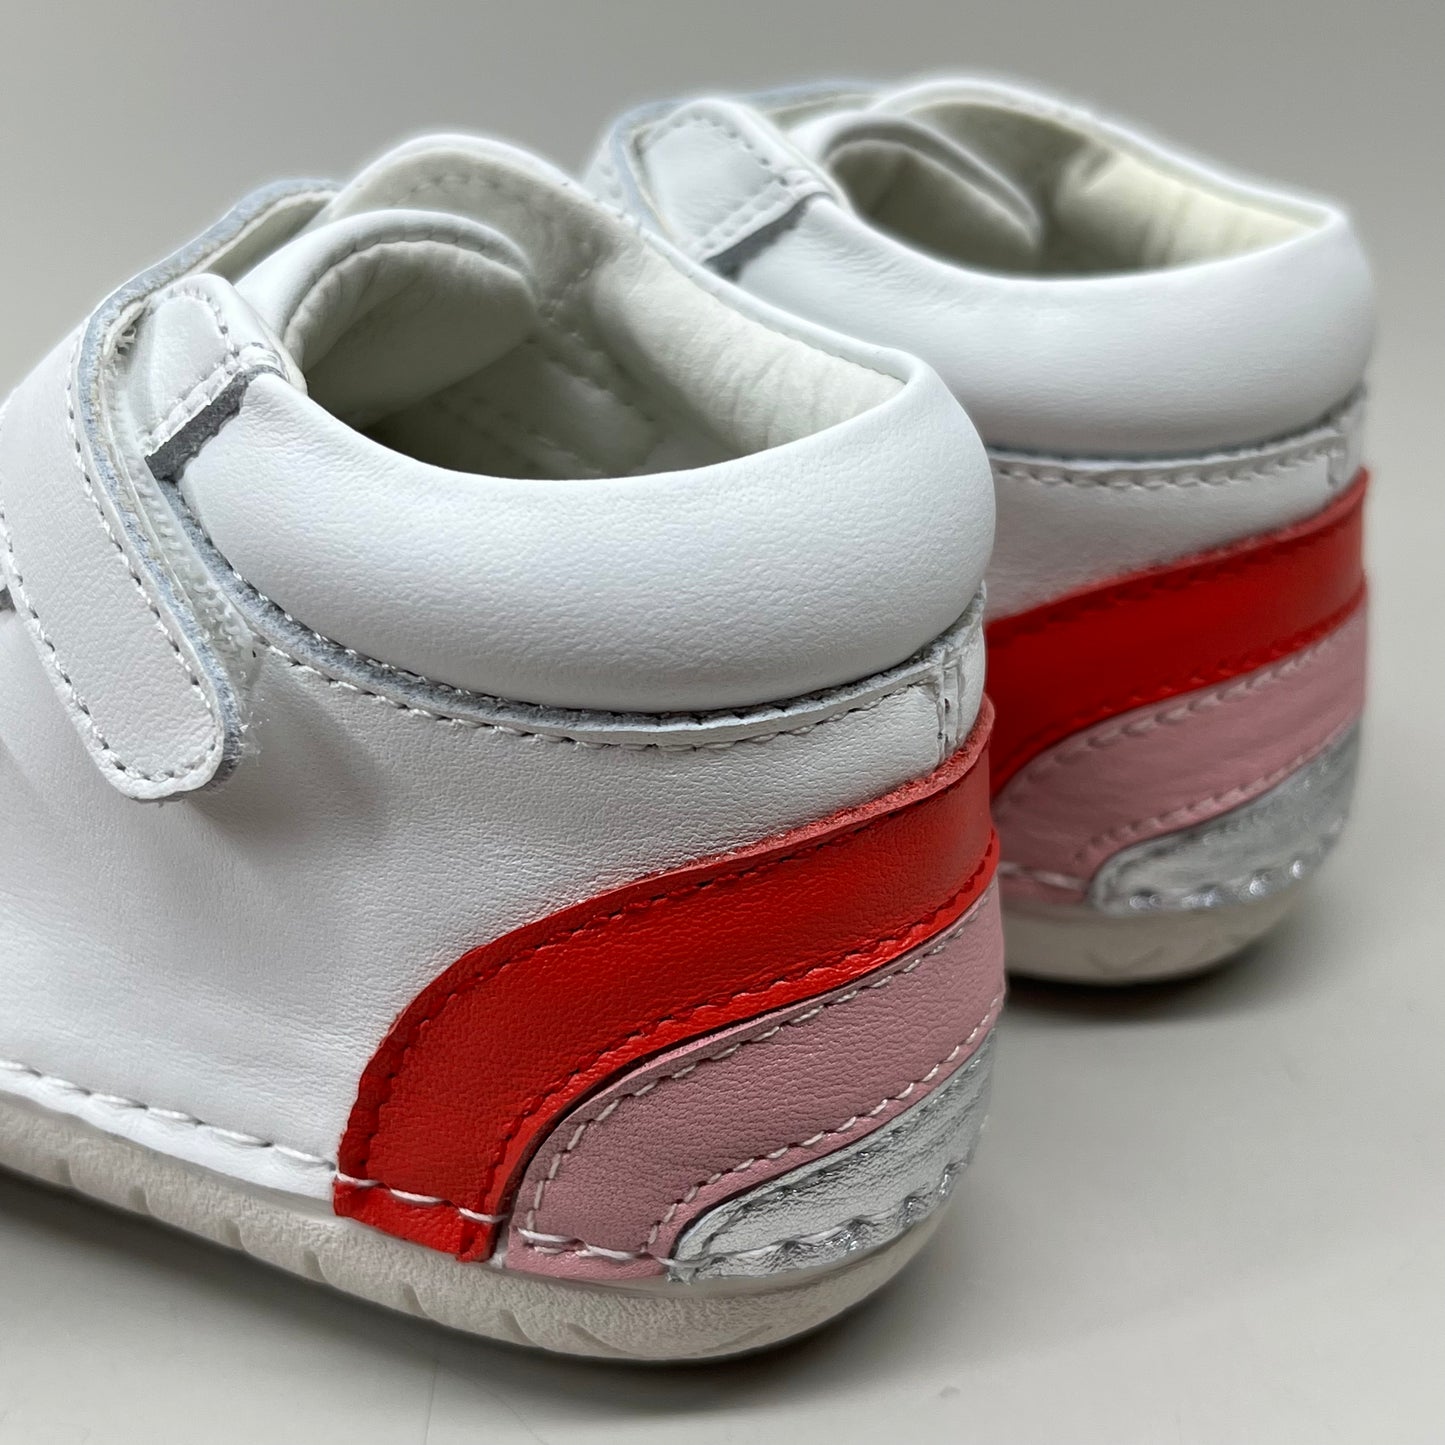 OLD SOLES Baby Champster Leather Shoe Sz 20 US 4 Snow/Red/ Pink/Silver #4091